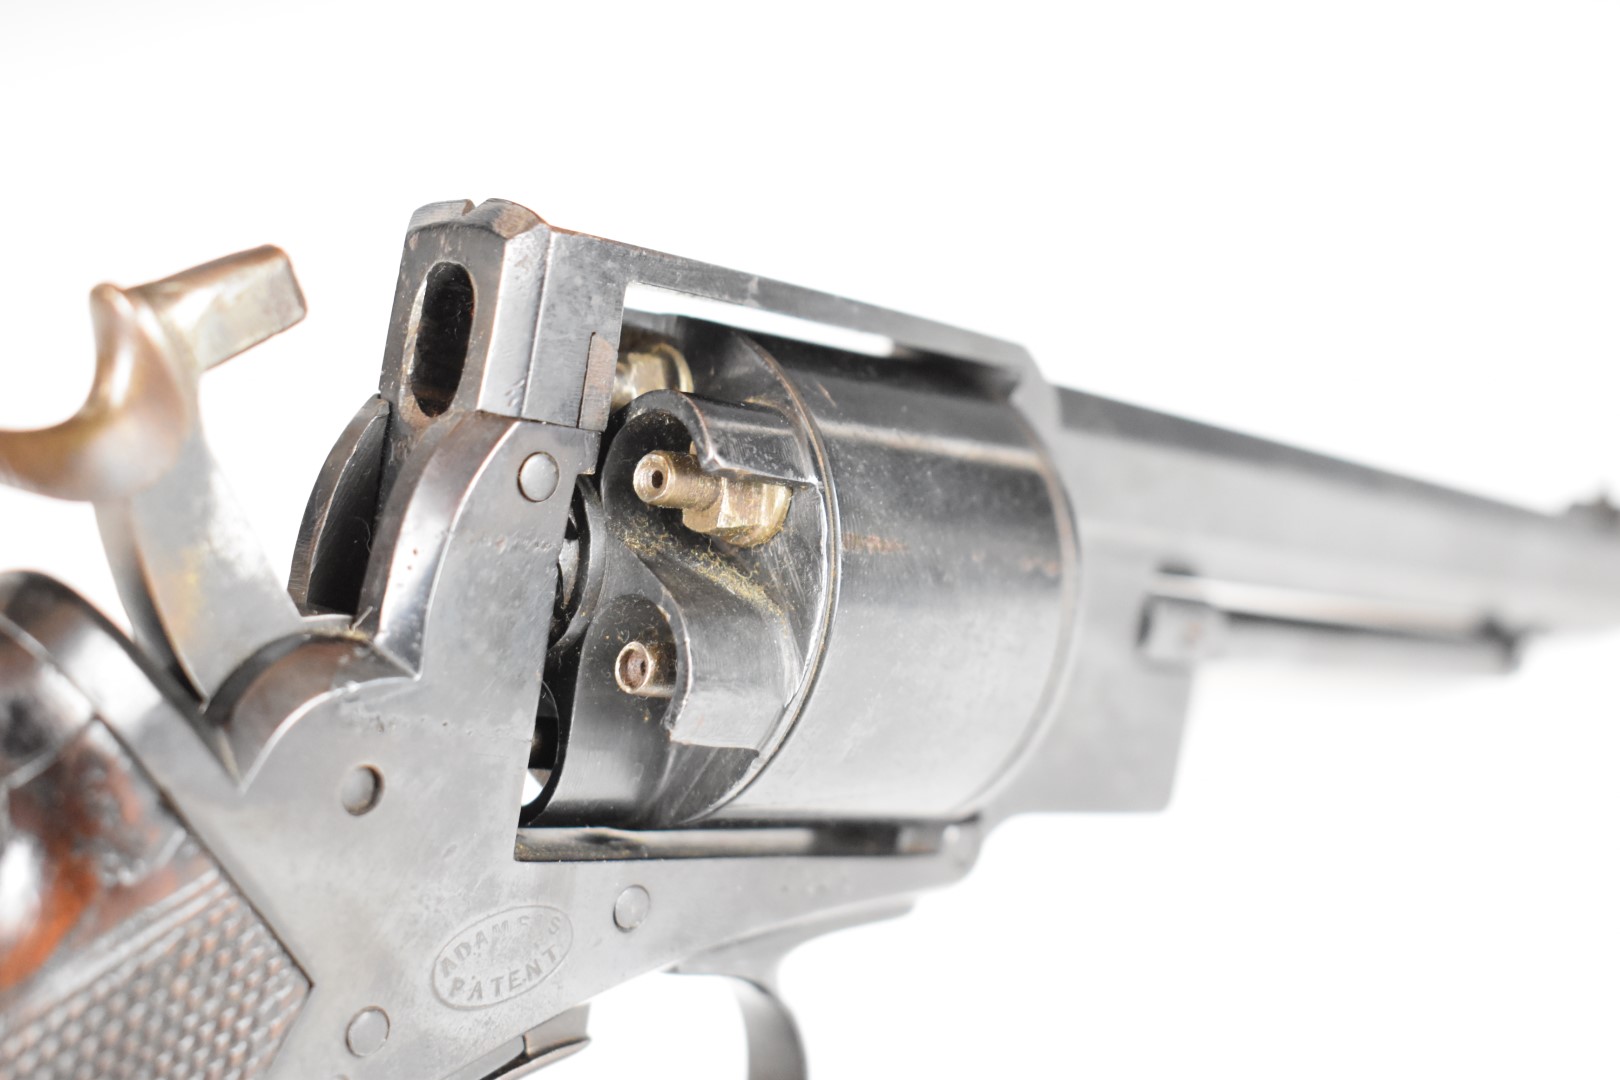 Adam's Patent 50 bore six-shot double-action revolver with chequered grip, line engraved cylinder, - Image 10 of 30